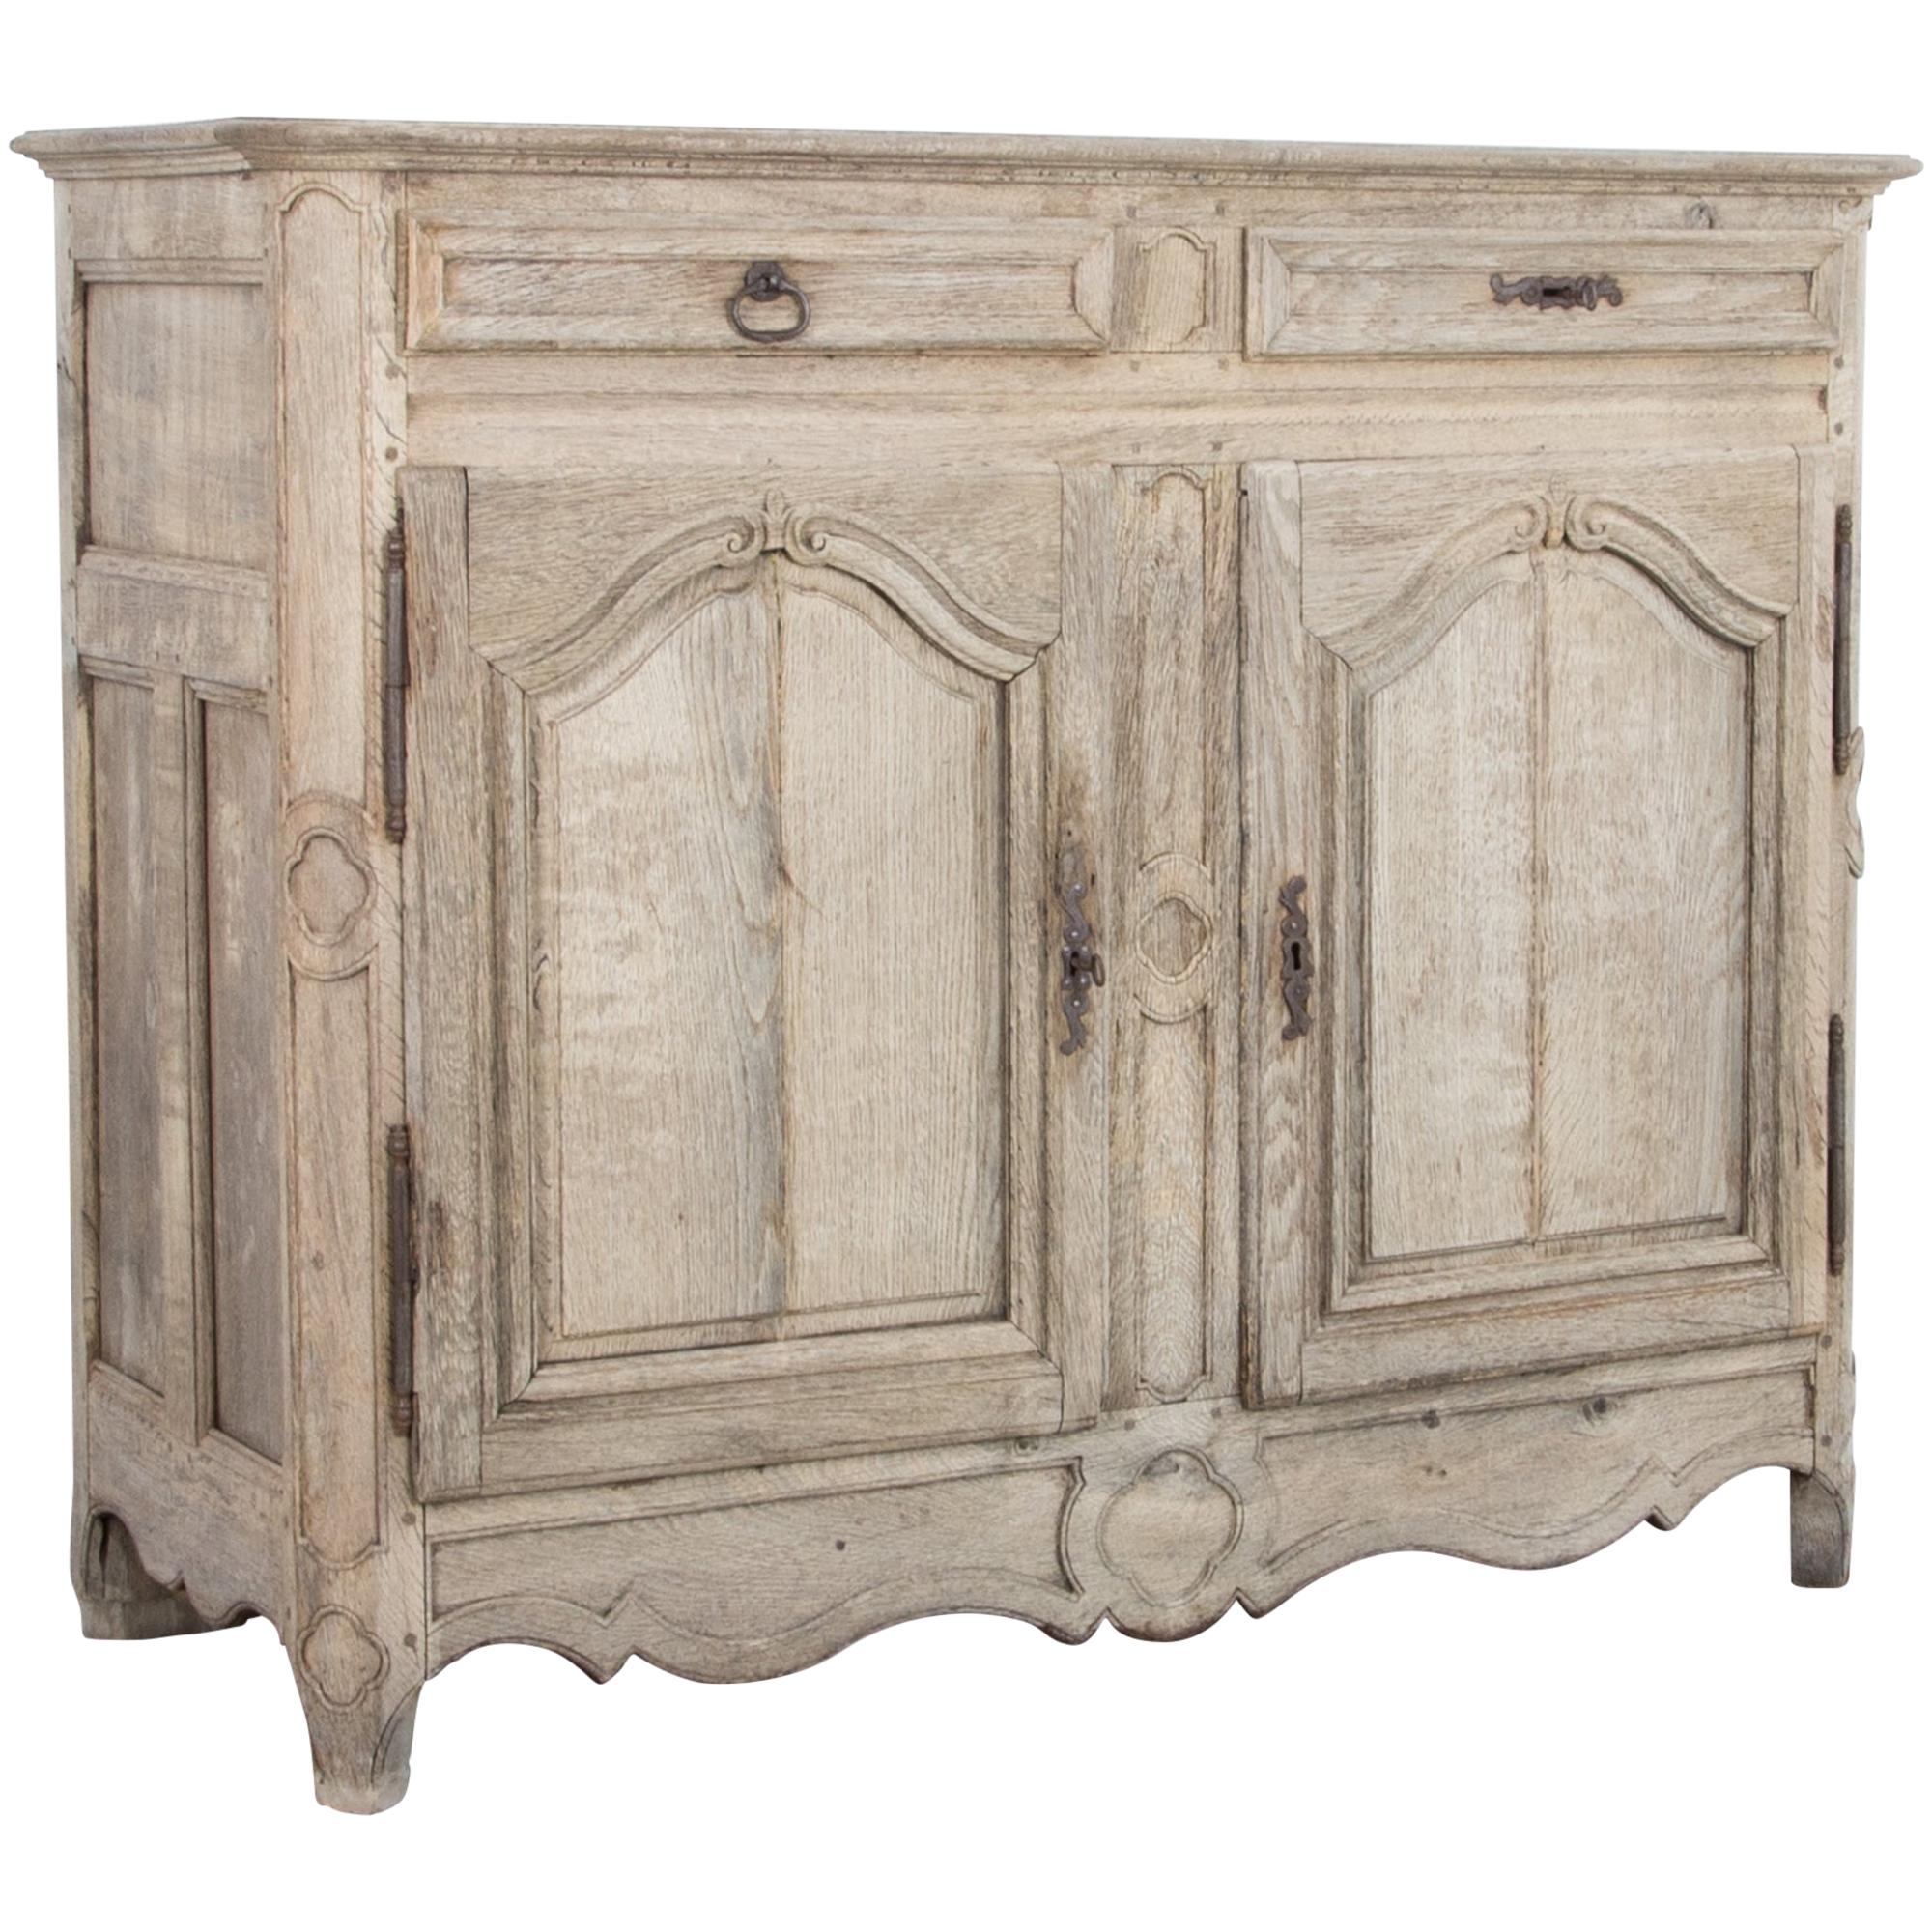 19th Century French Bleached Oak Buffet Cabinet